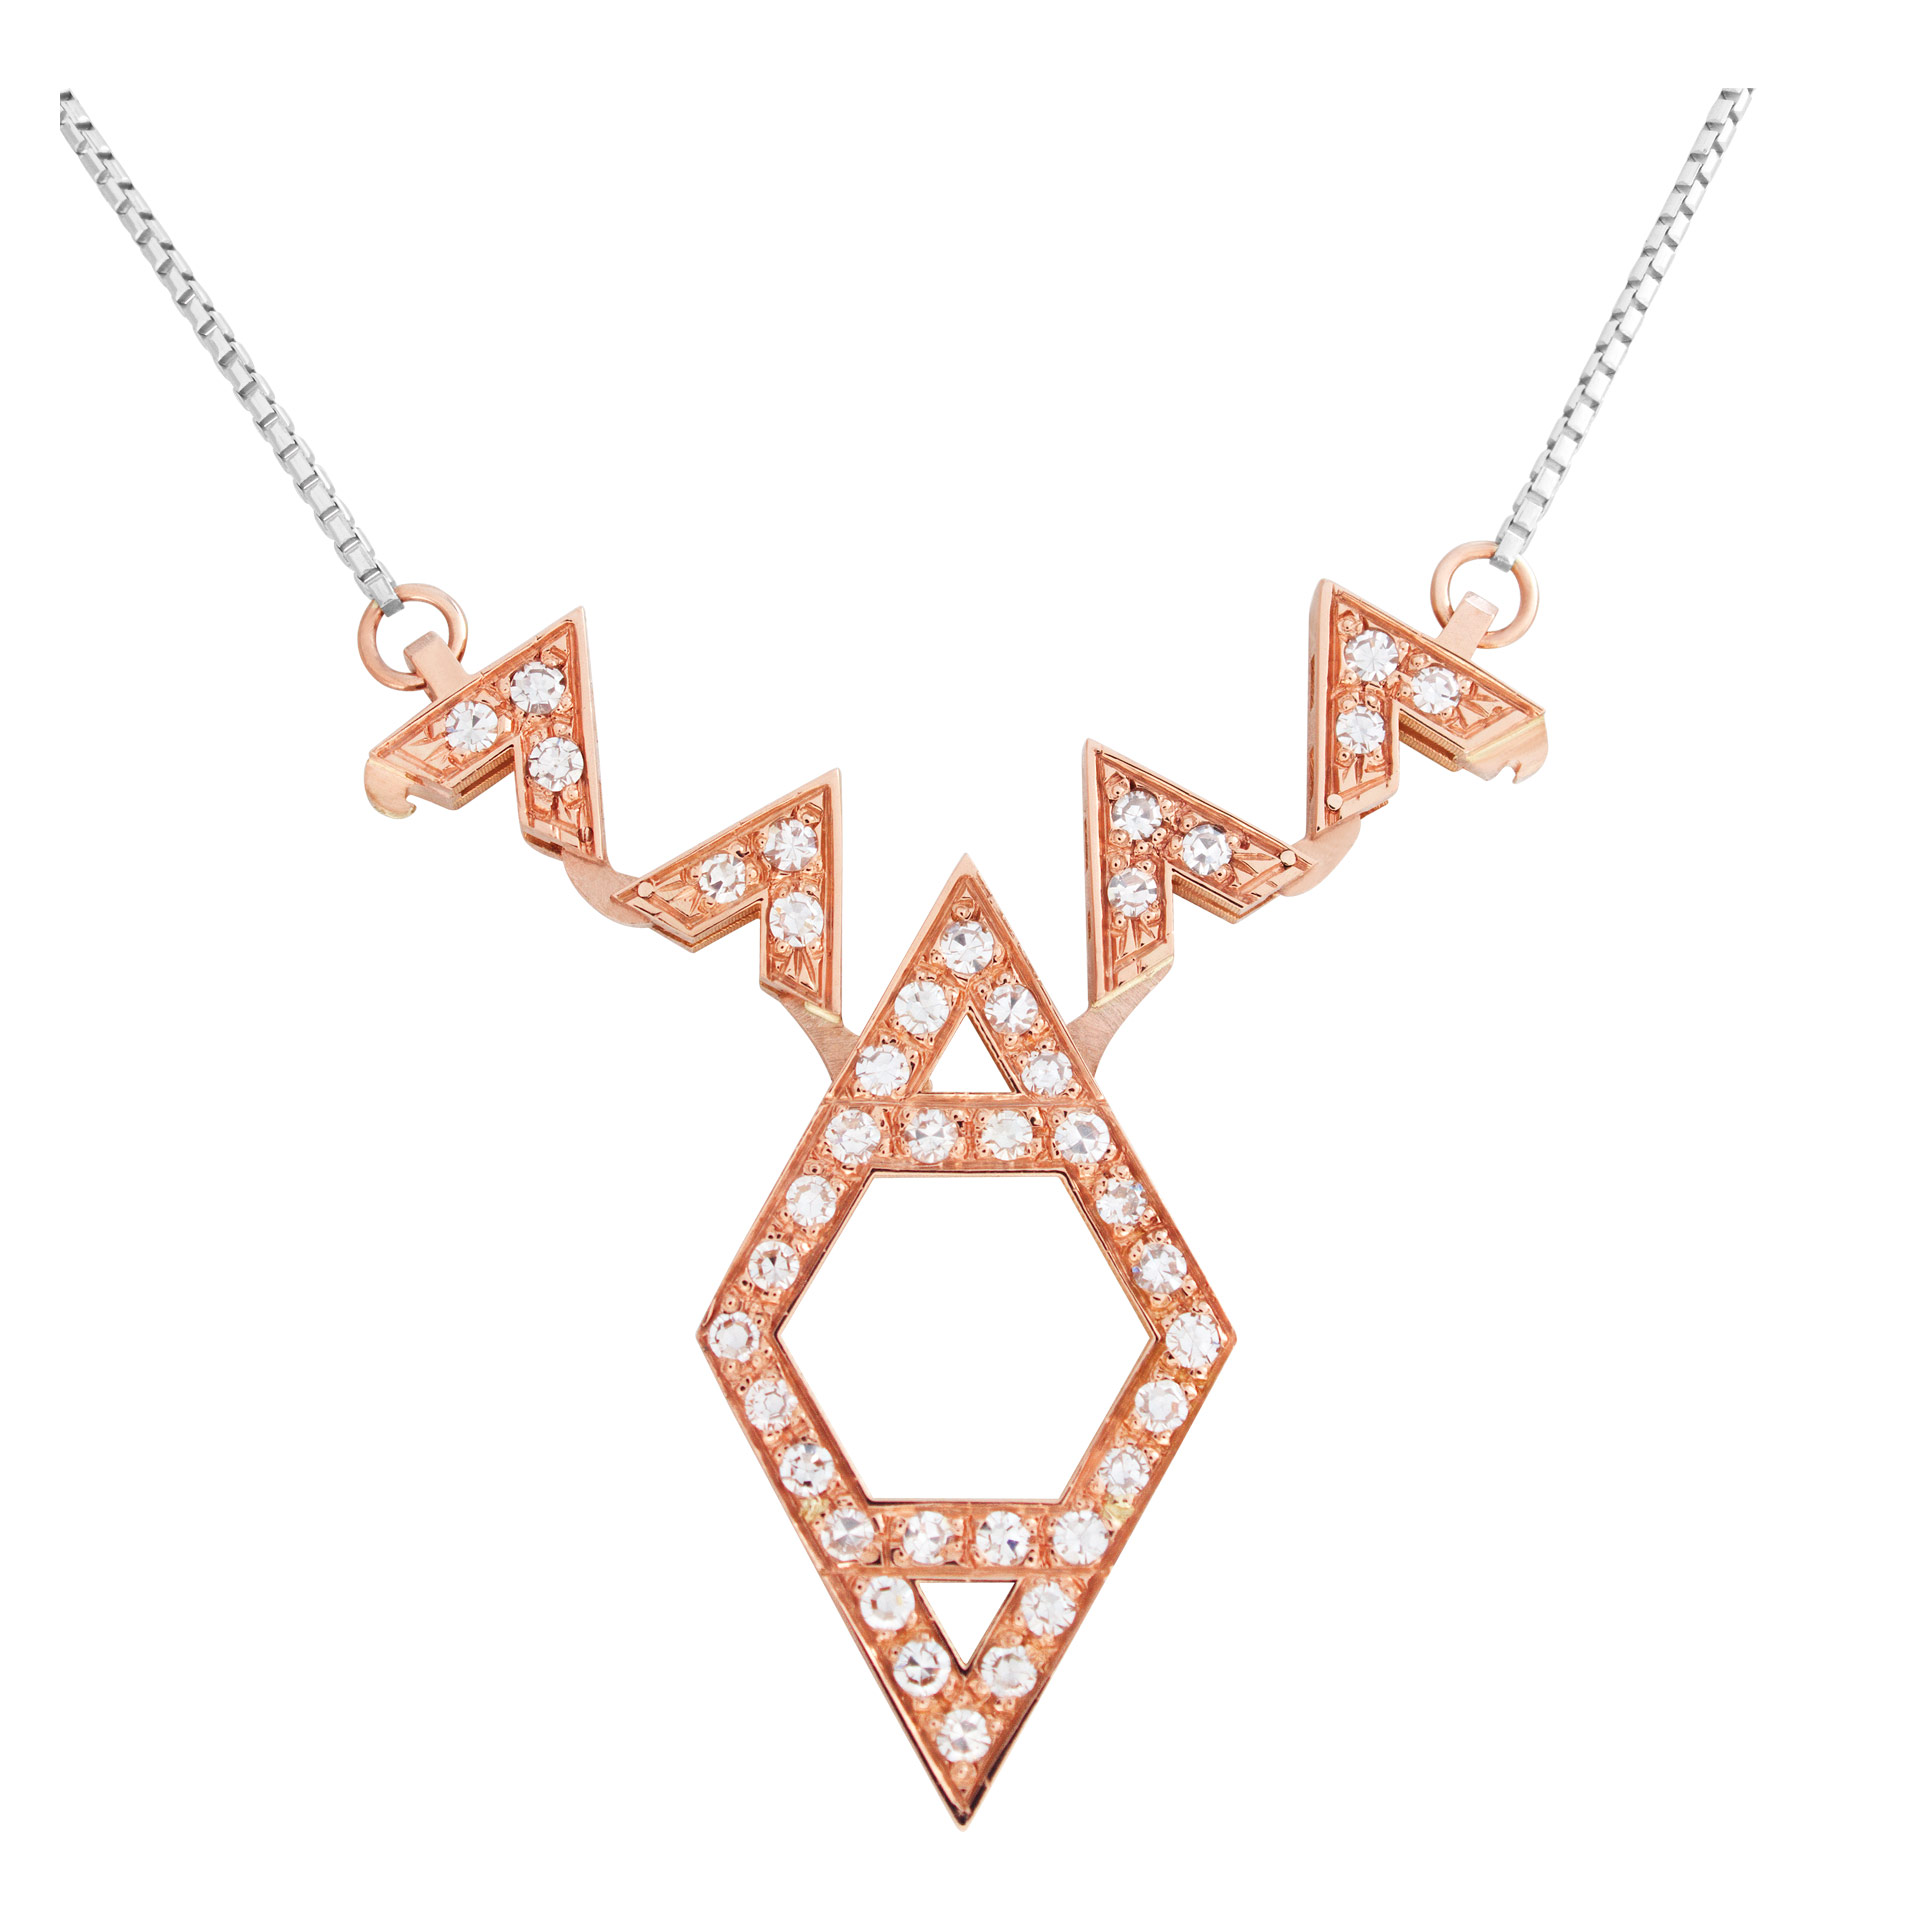 "Star of David" pendant with approximately 0.75 carat pave diamonds set in 18k rose gold with an 18k white gold chain (Stones) image 5